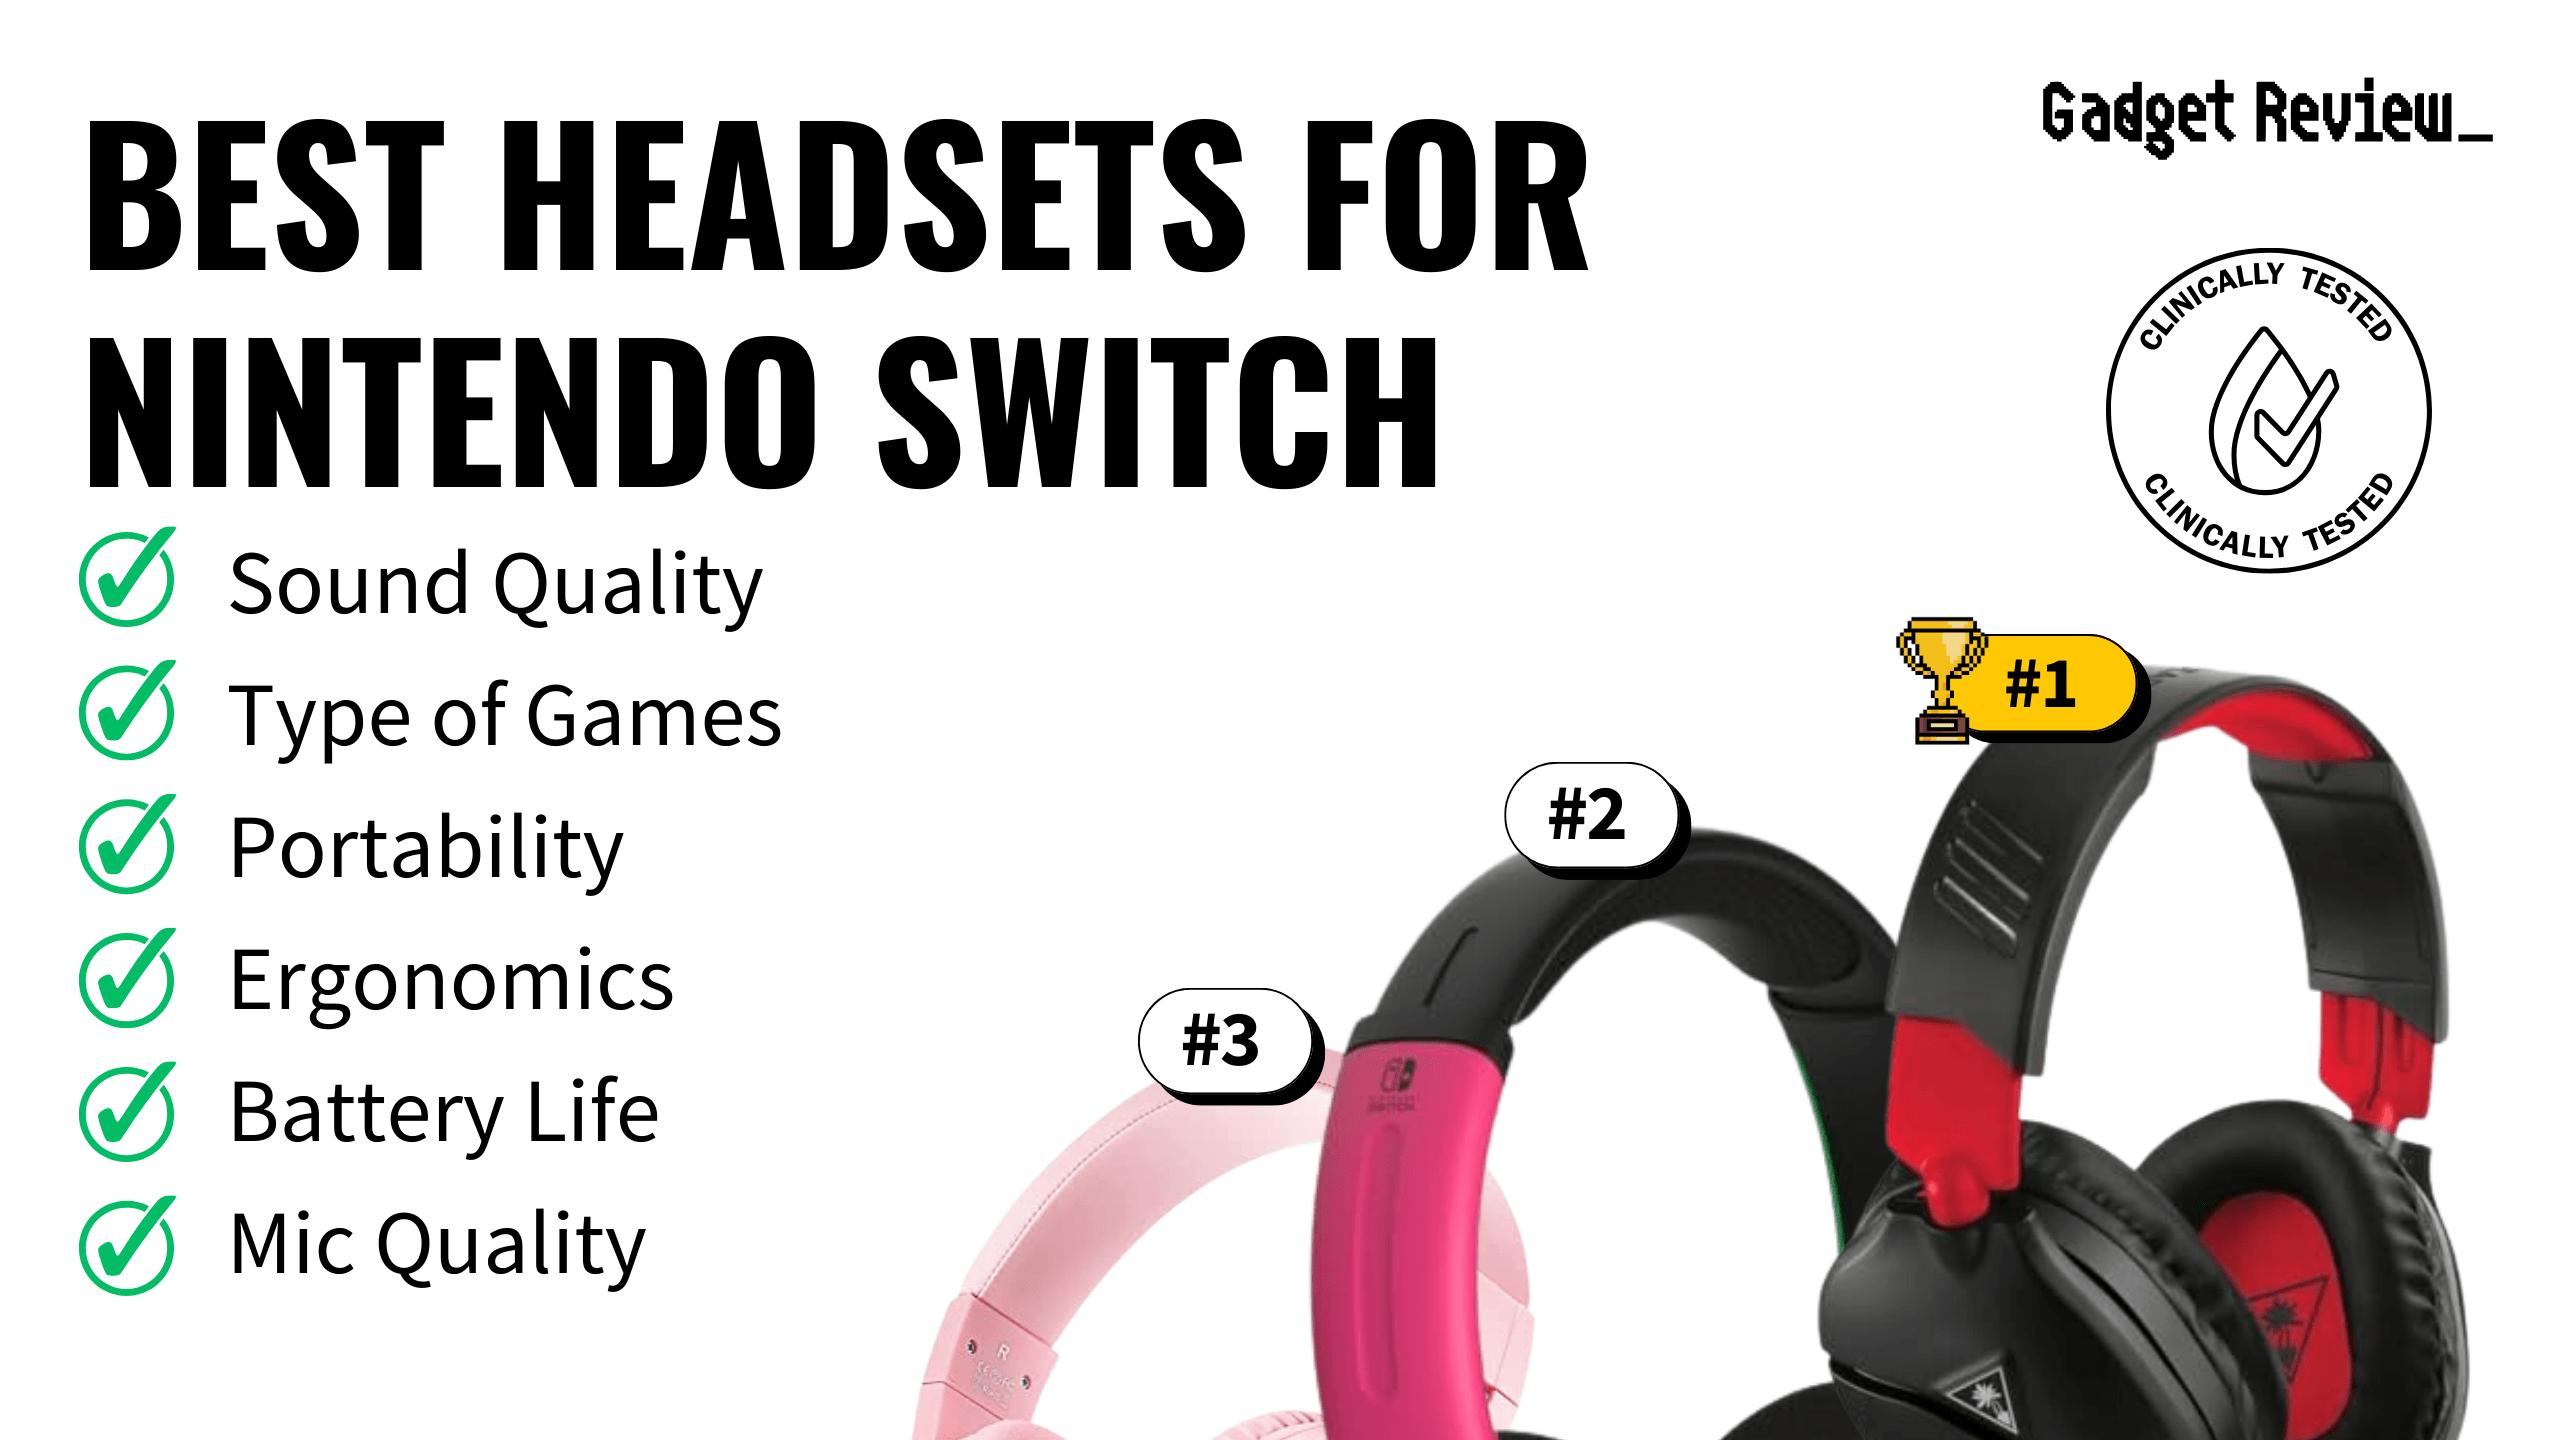 best headset for nintendo switch featured image that shows the top three best gaming headset models